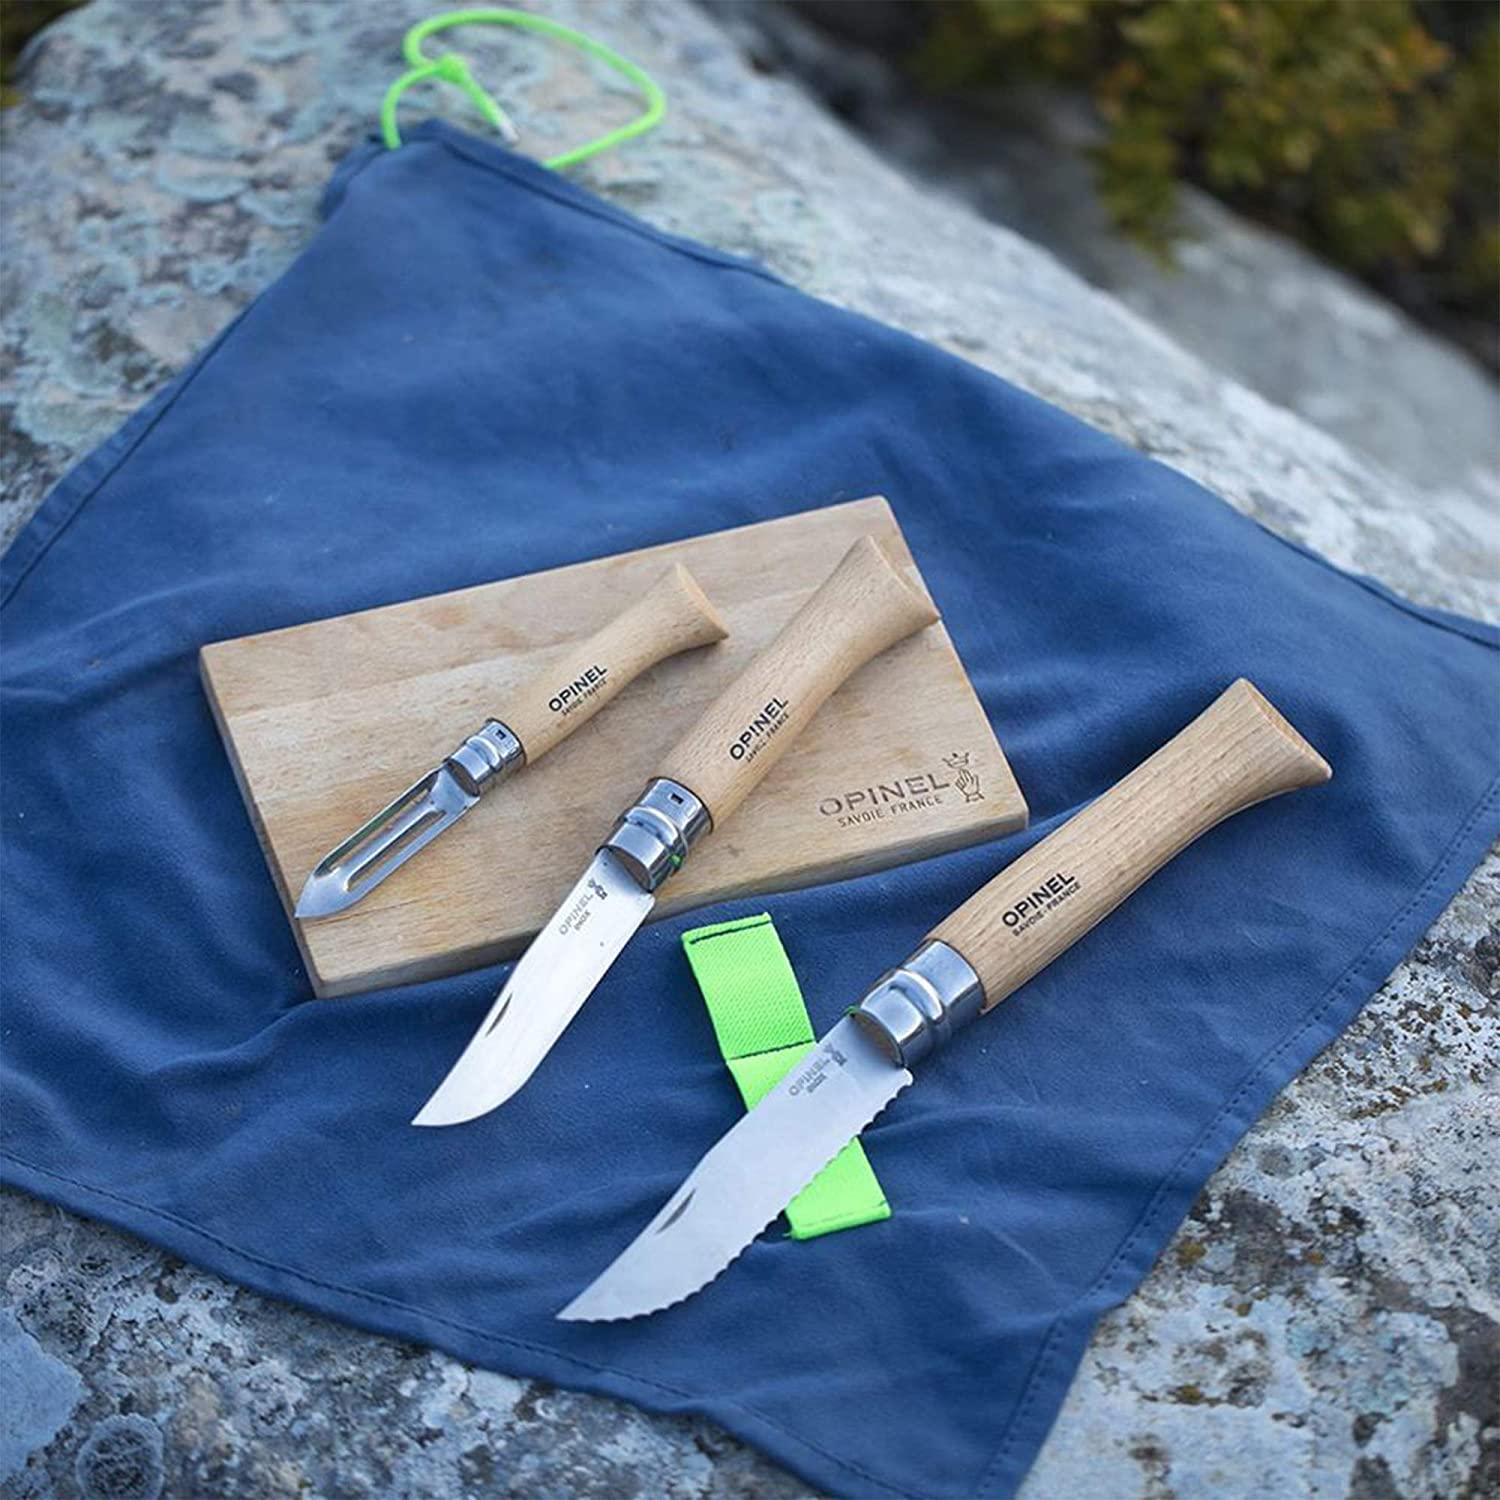 Opinel Nomad Camping Kitchen Utensil Kit, Includes No.12 Serrated